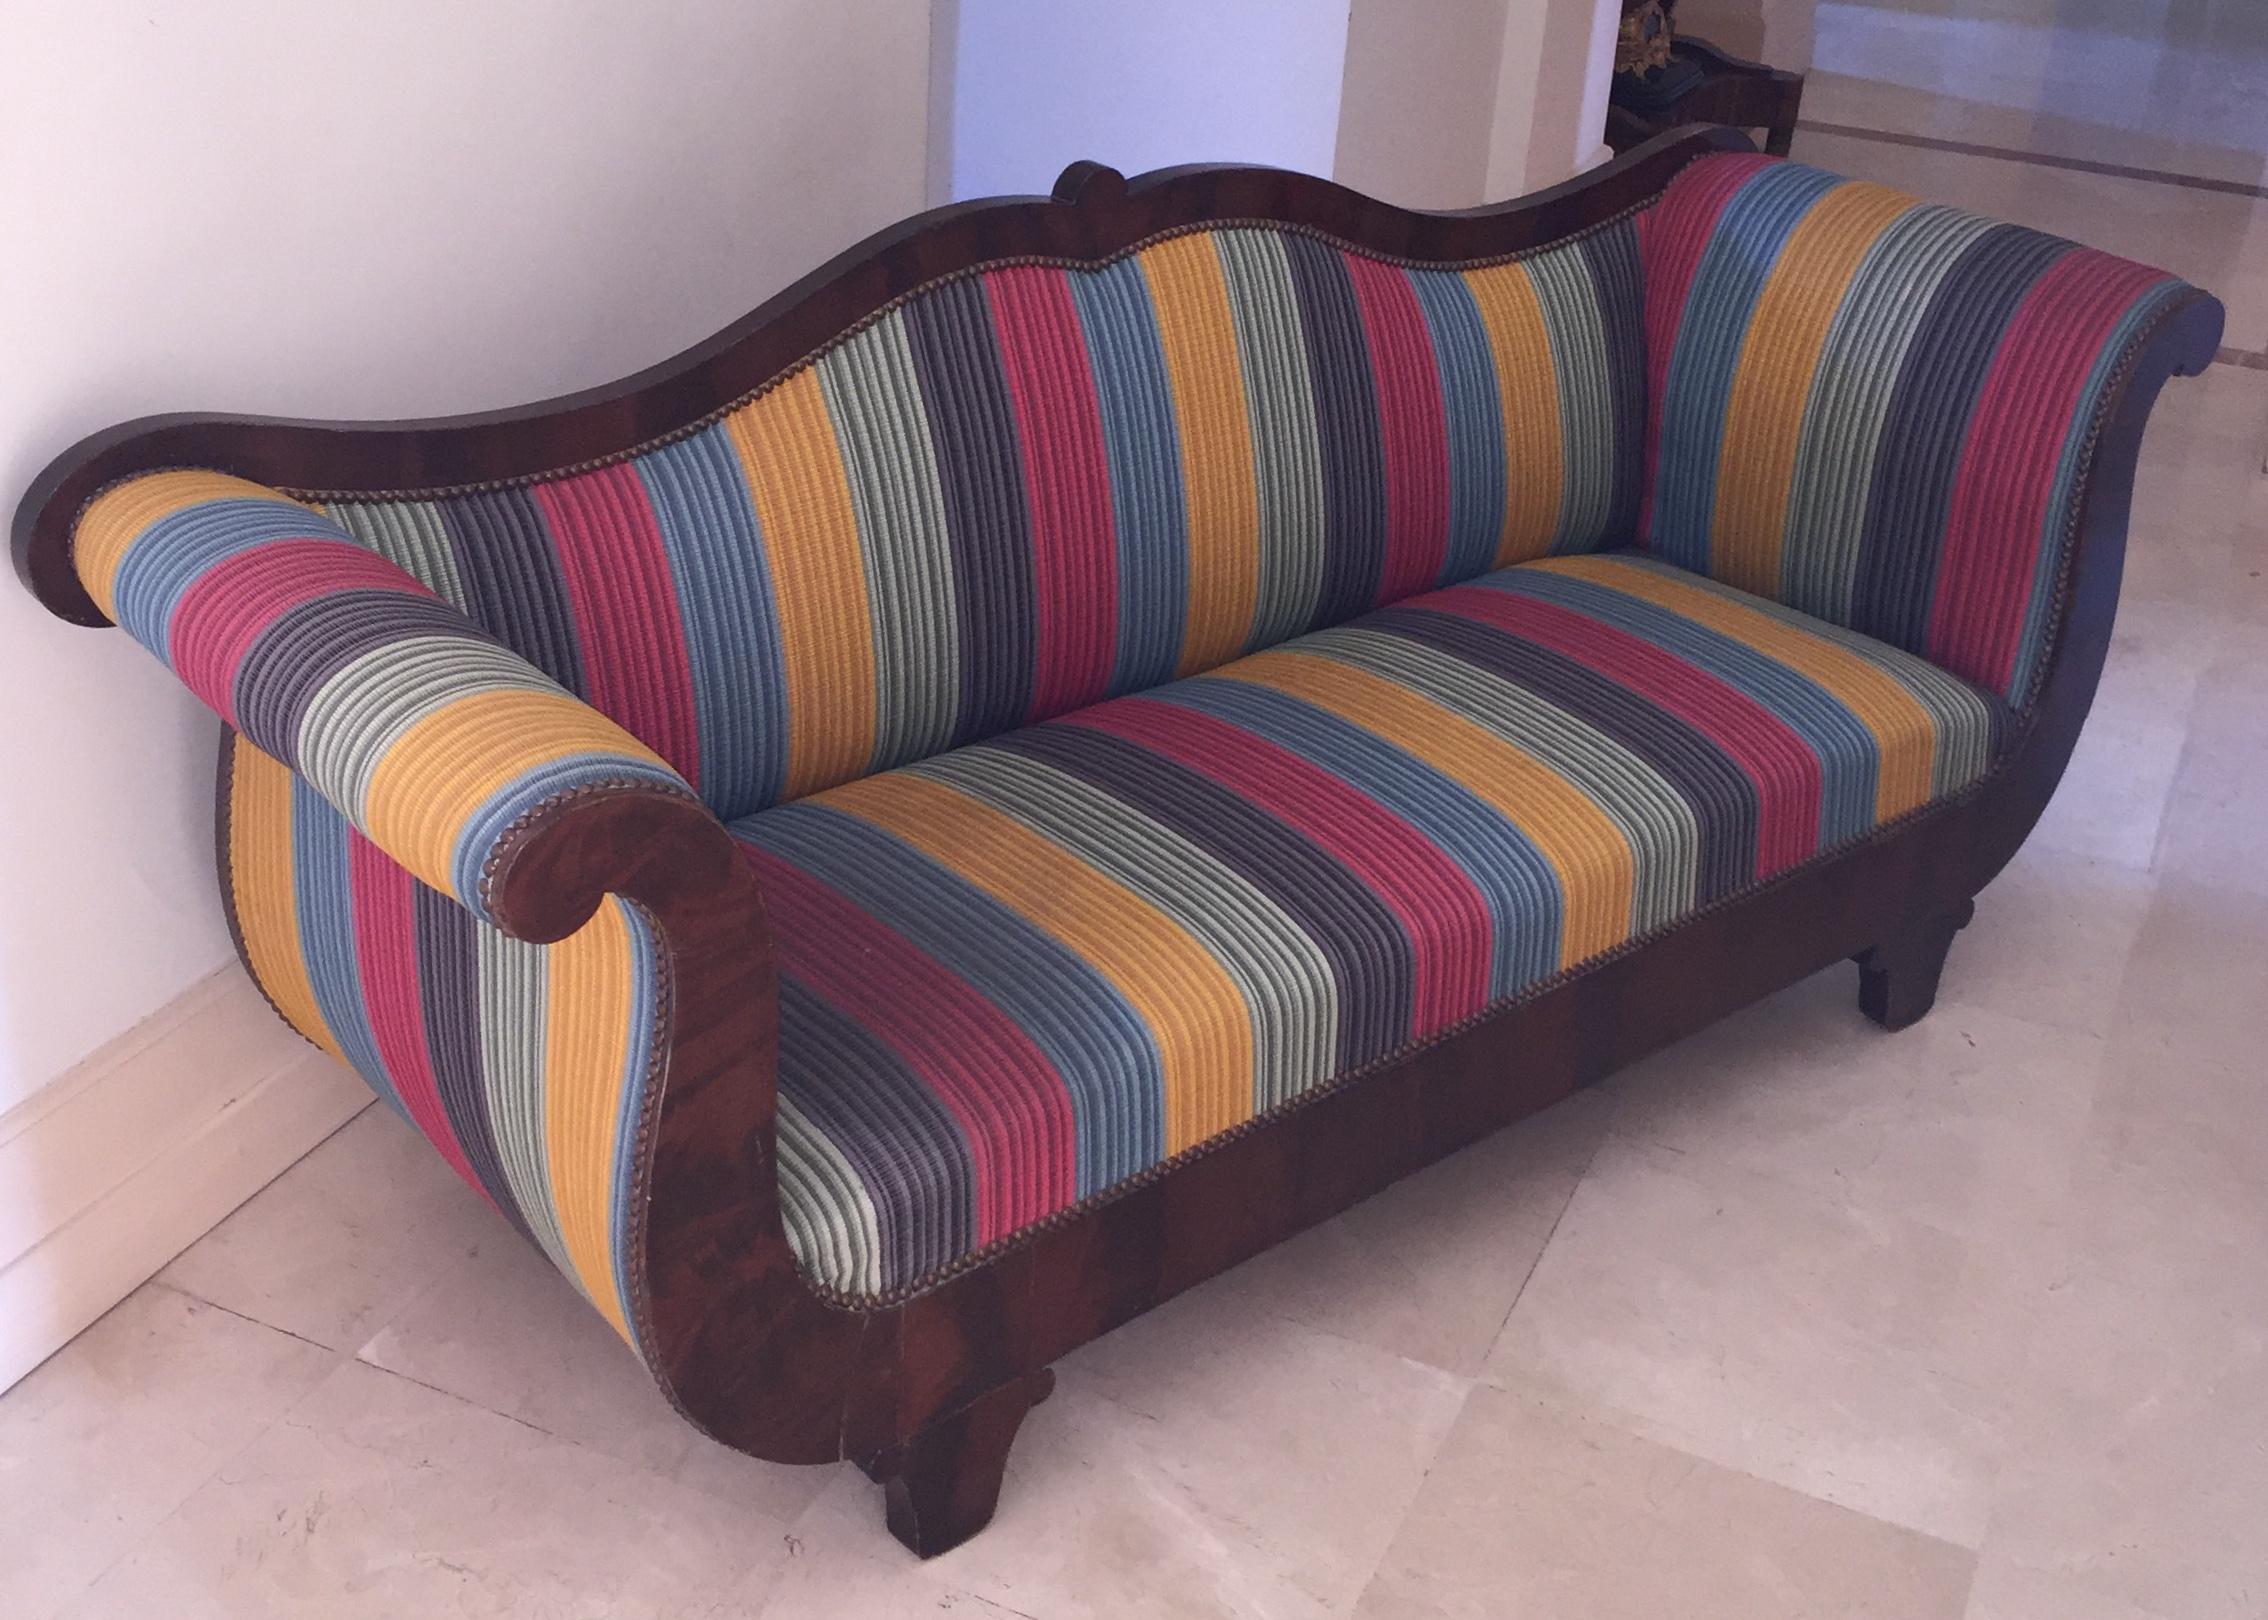 Mahogany French Louis Phill Bench, Day Bed in Mahogan Yellow Blue Red Soft Stipes Fabric For Sale